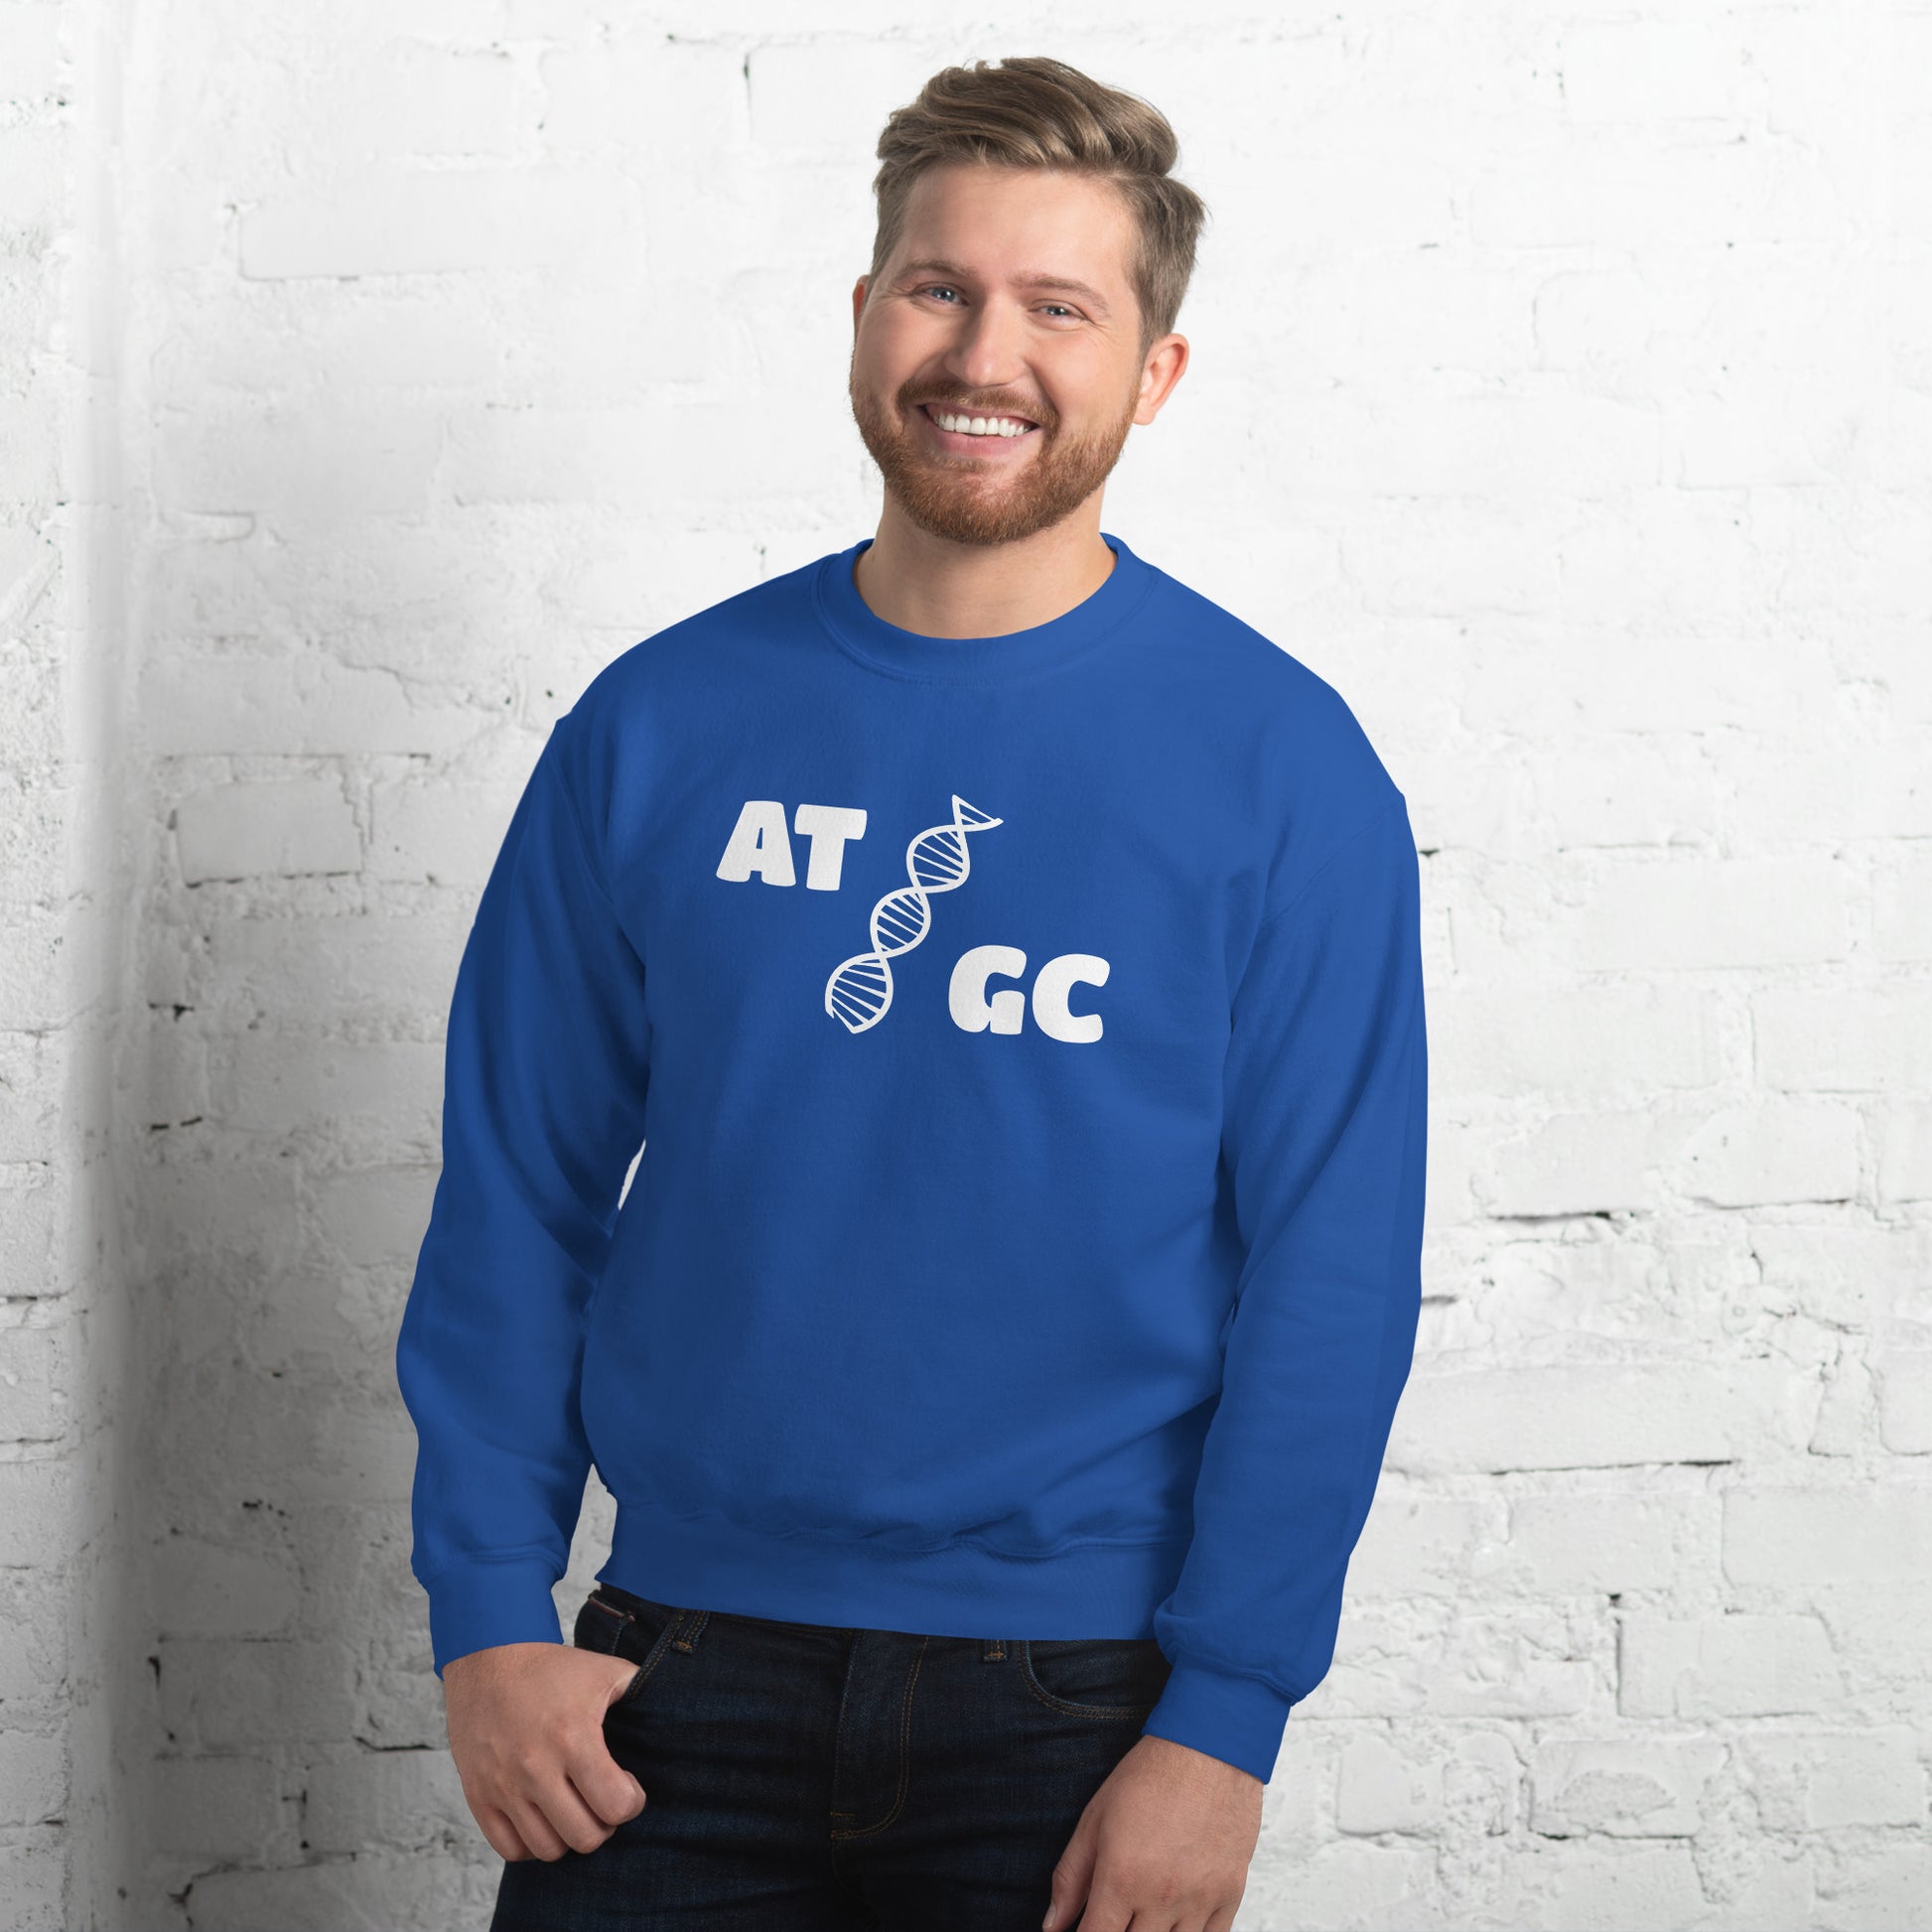 Men with royal blue sweatshirt with image of a DNA string and the text "ATGC"